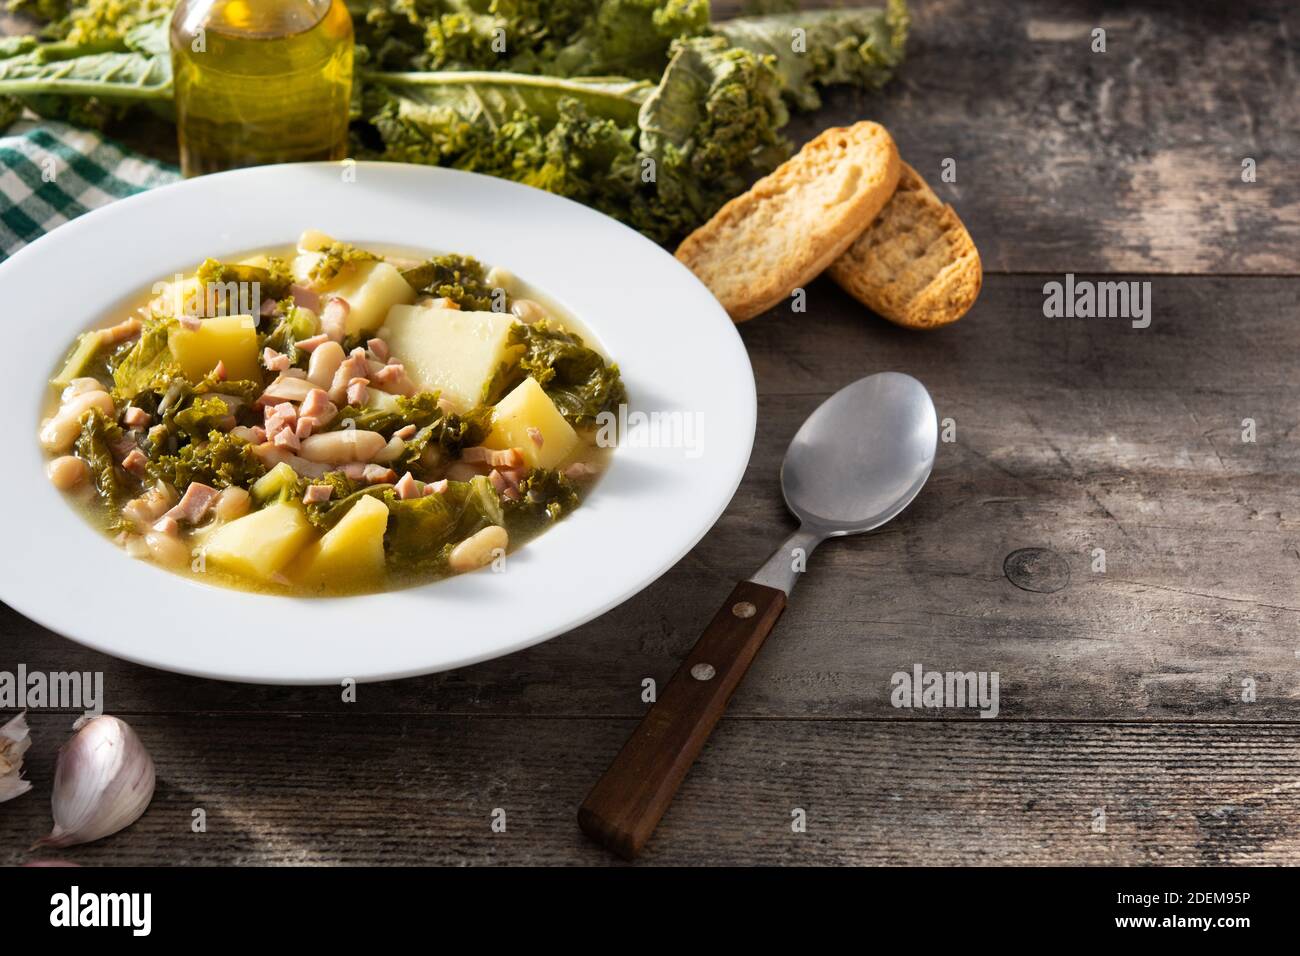 Creamy Tuscan soup on wooden table Stock Photo